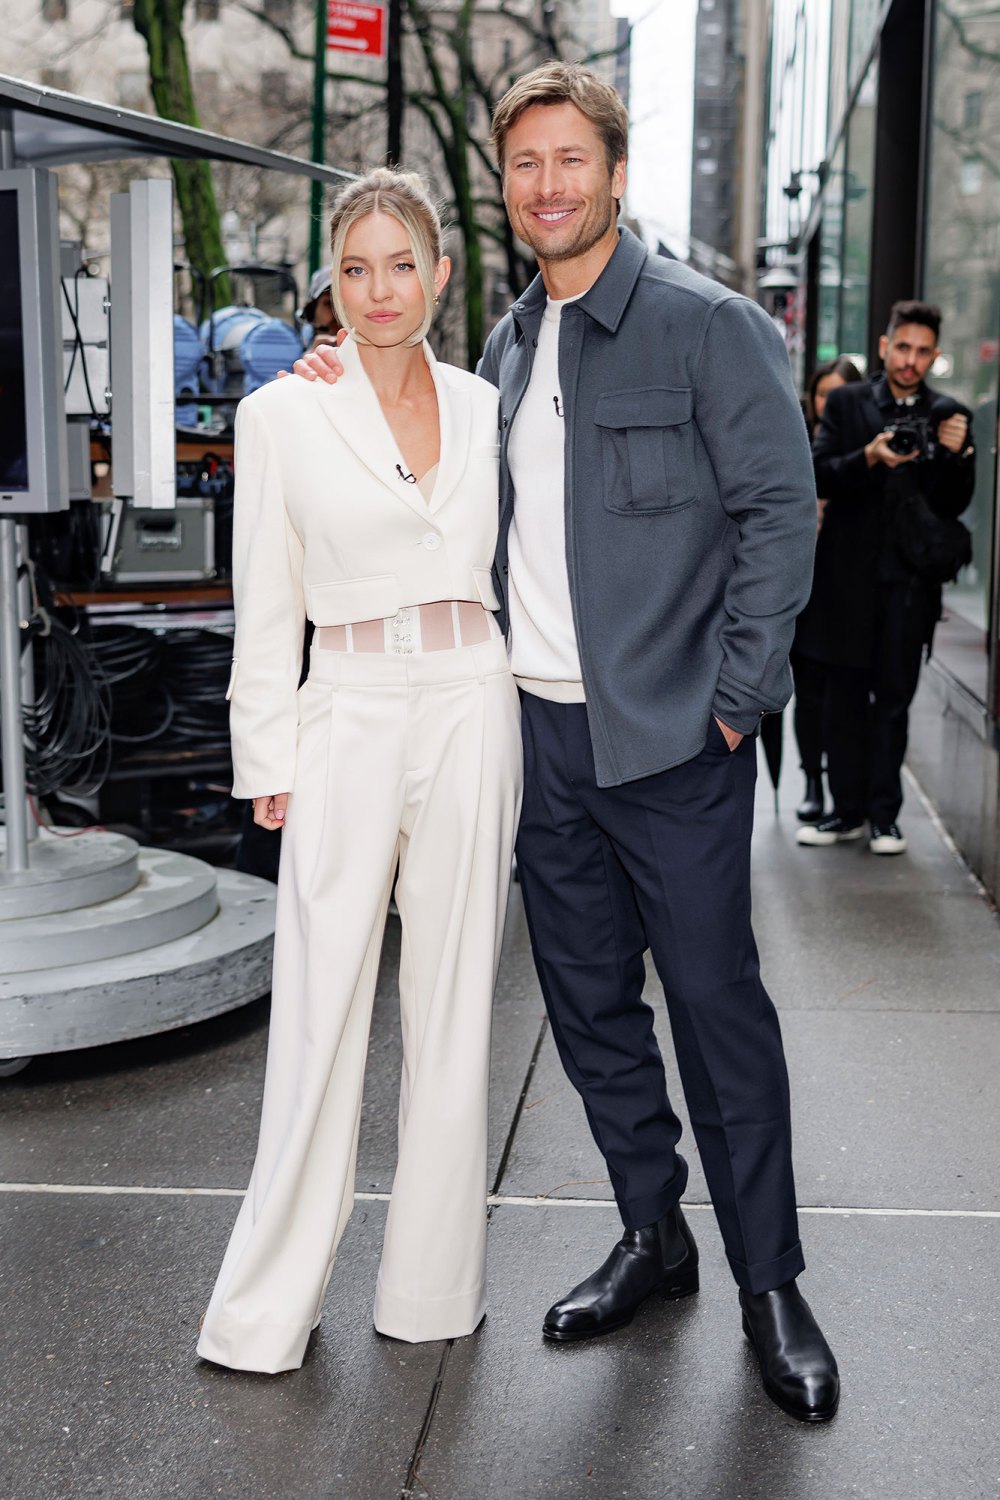 Glen Powell Confirms He and Sydney Sweeney Aren't Dating But Do Love Each Other